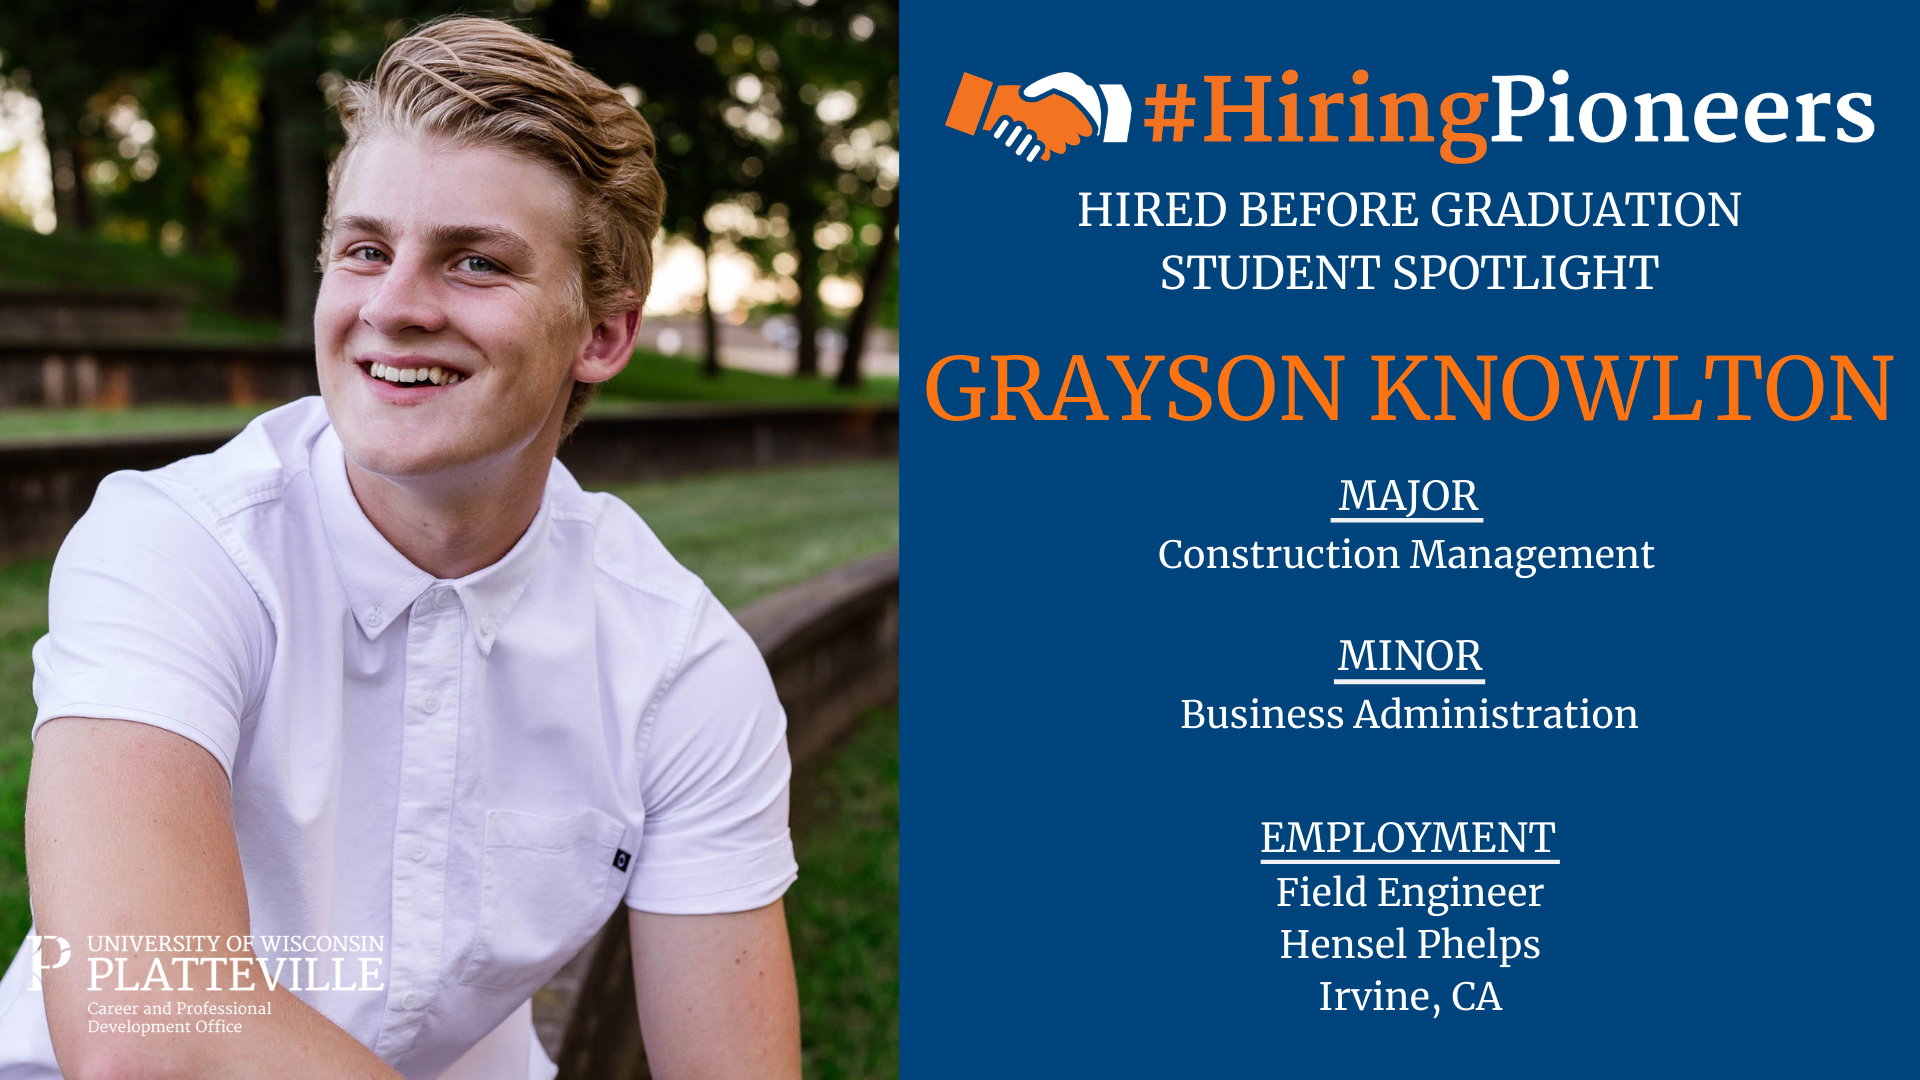 Grayson Knowlton, Hired Before Graduation